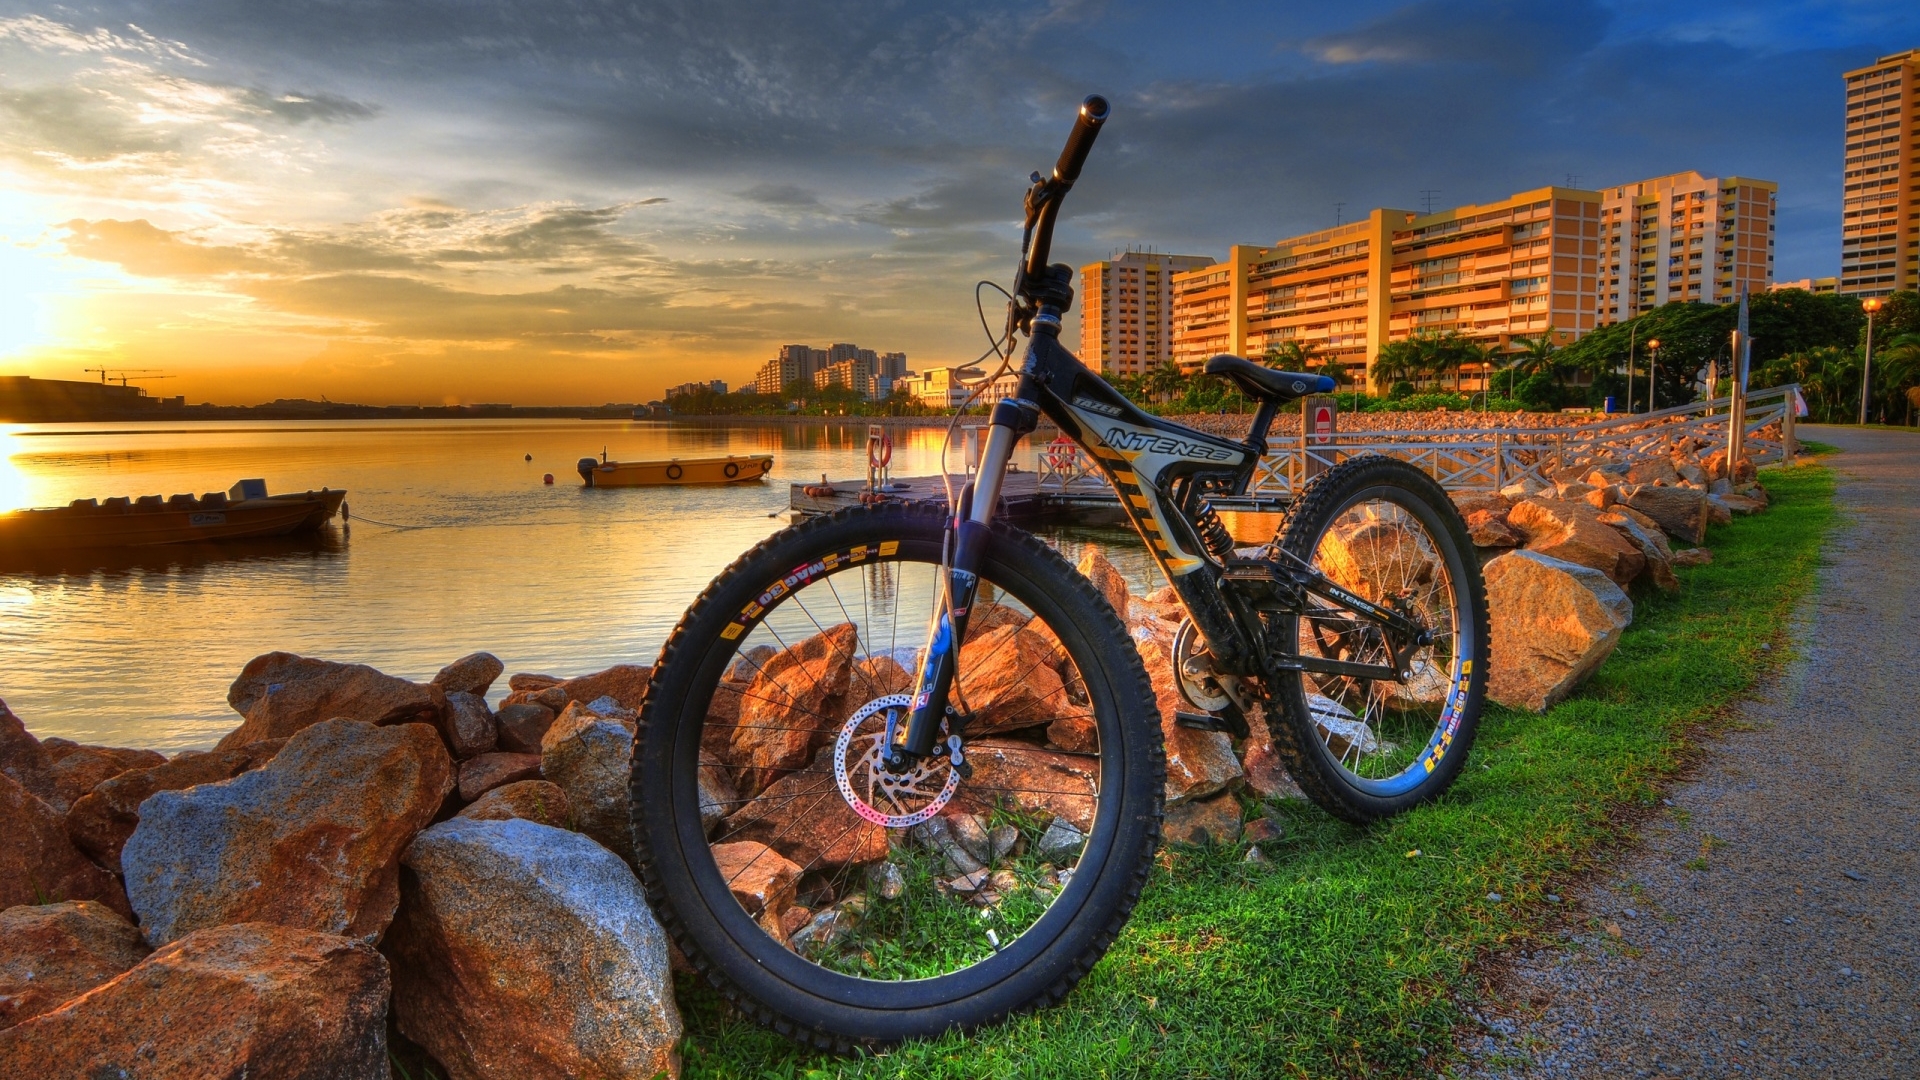 A colorful bicycle parked amidst a beautiful scenic view.